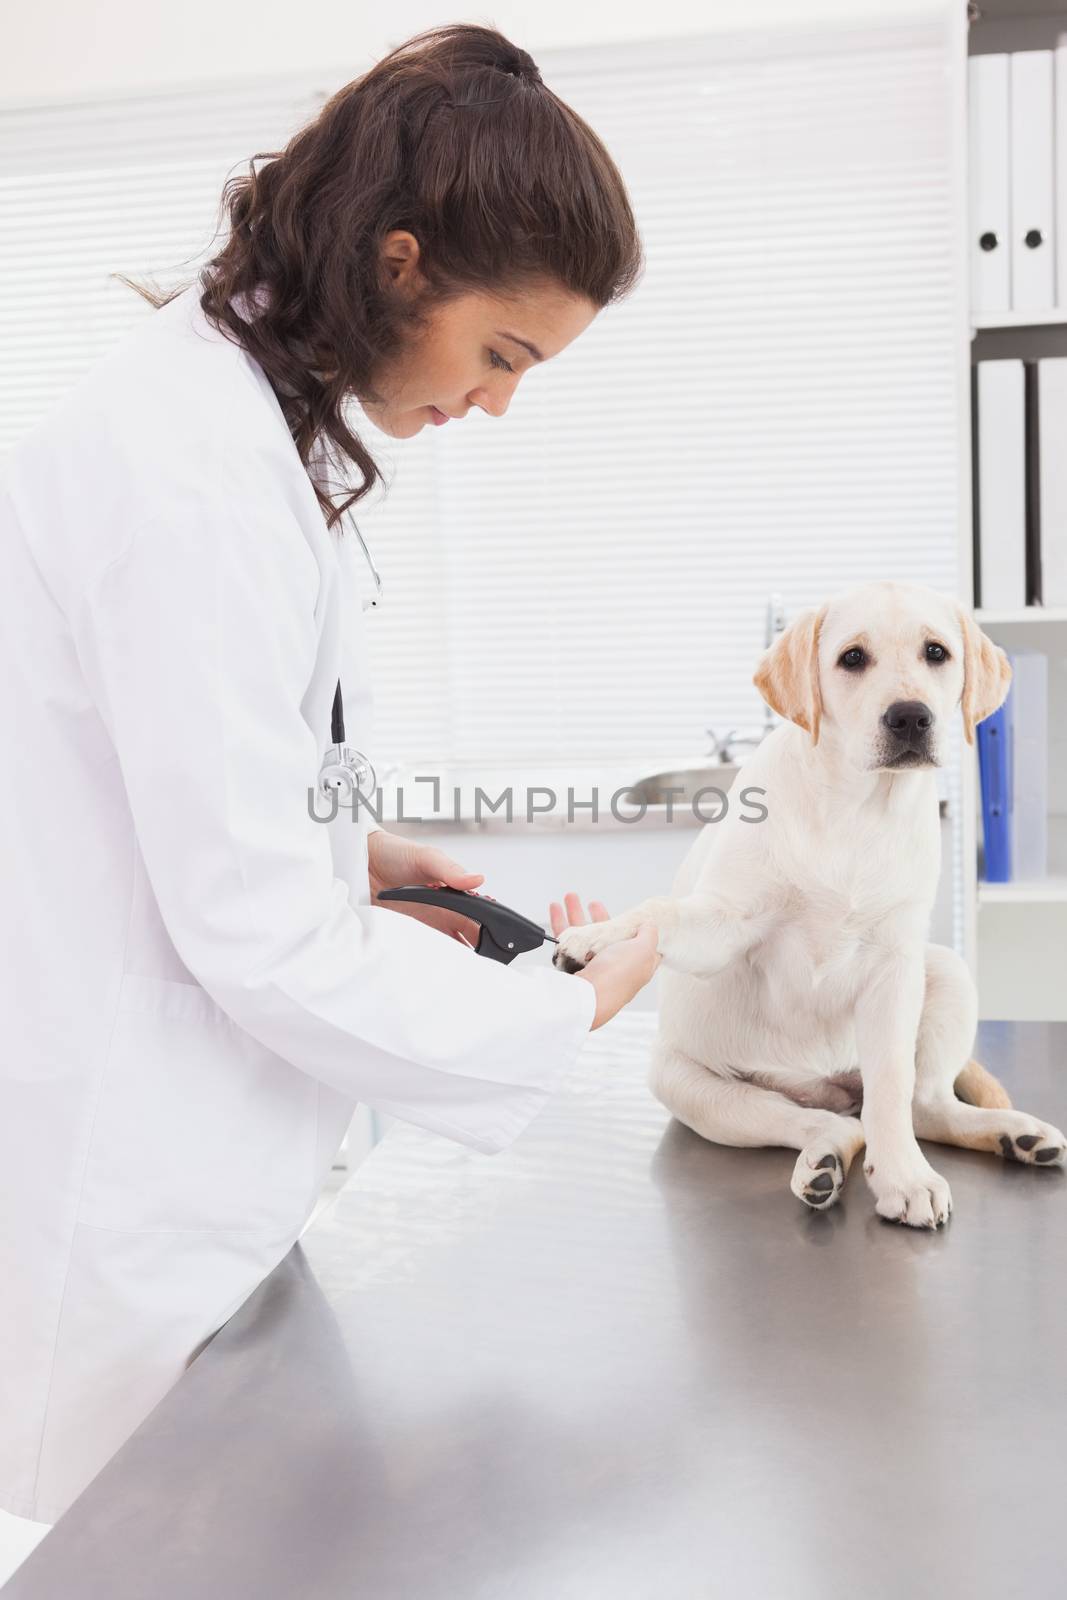 Vet using nail clipper on a labrador in medical office